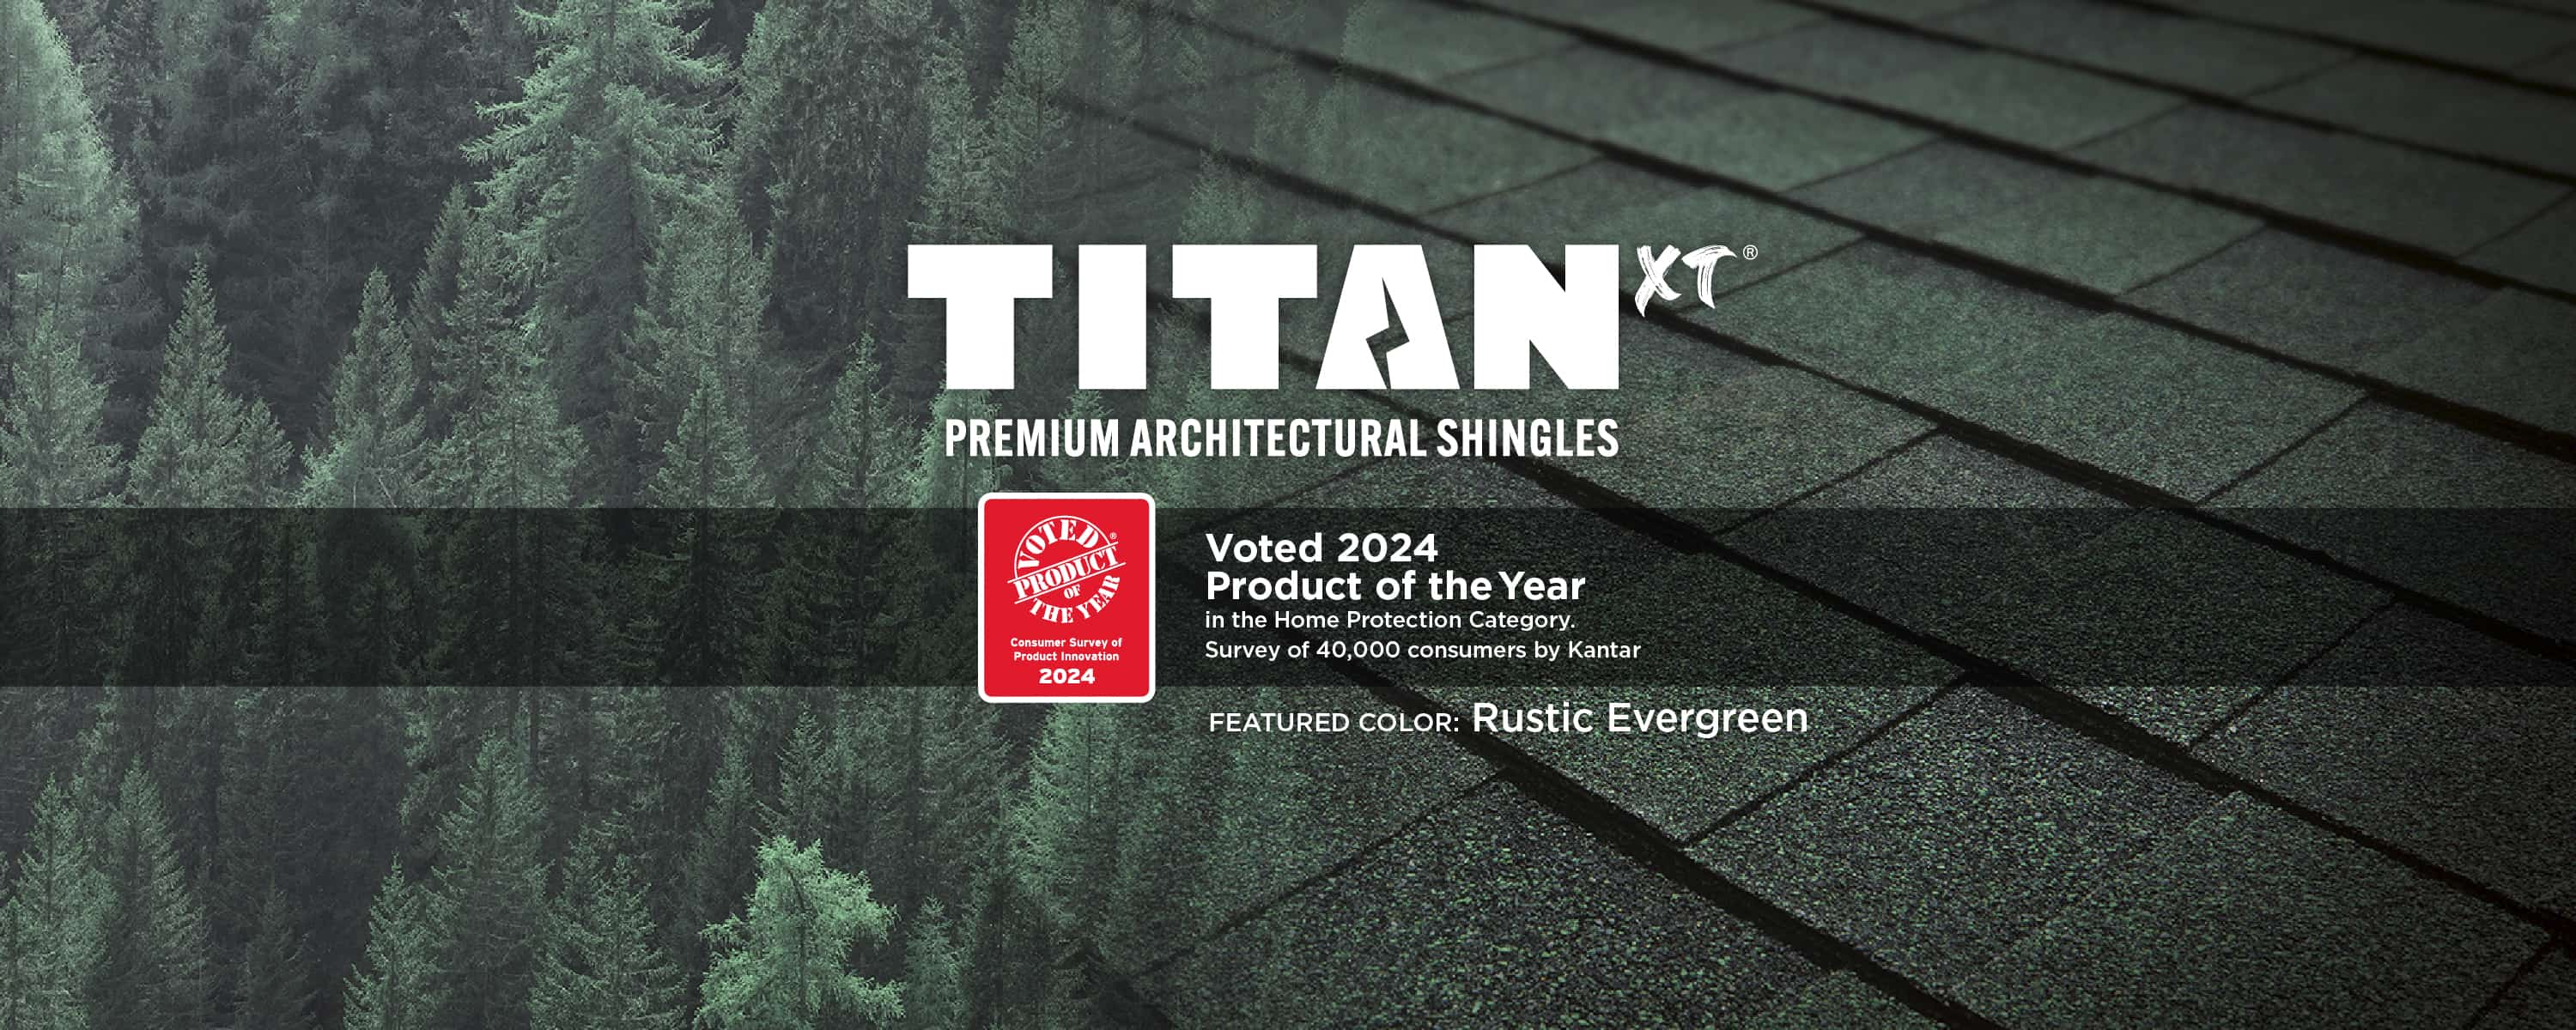 Titan XT 2024 Product of the Year - Rustic Evergreen